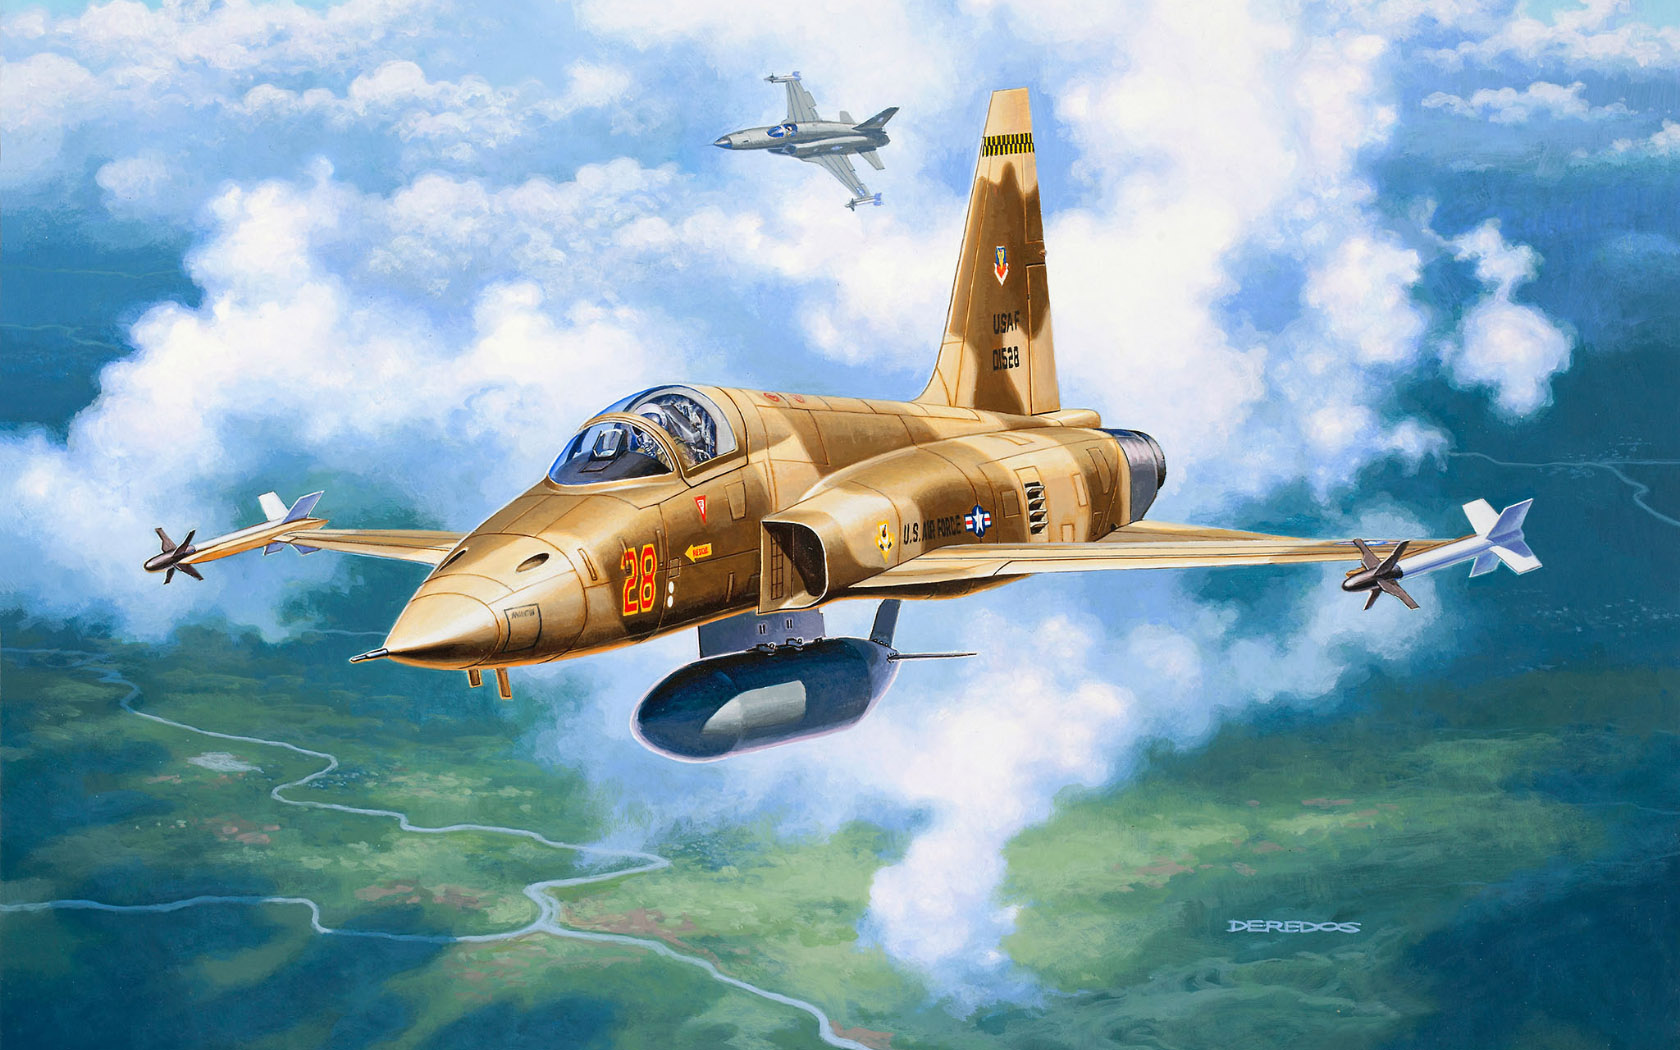 General 1680x1050 military science aircraft sky clouds flying artwork military aircraft Northrop F-5 Tiger II US Air Force jet fighter Vietnam War camouflage Boxart Andrzej Deredos